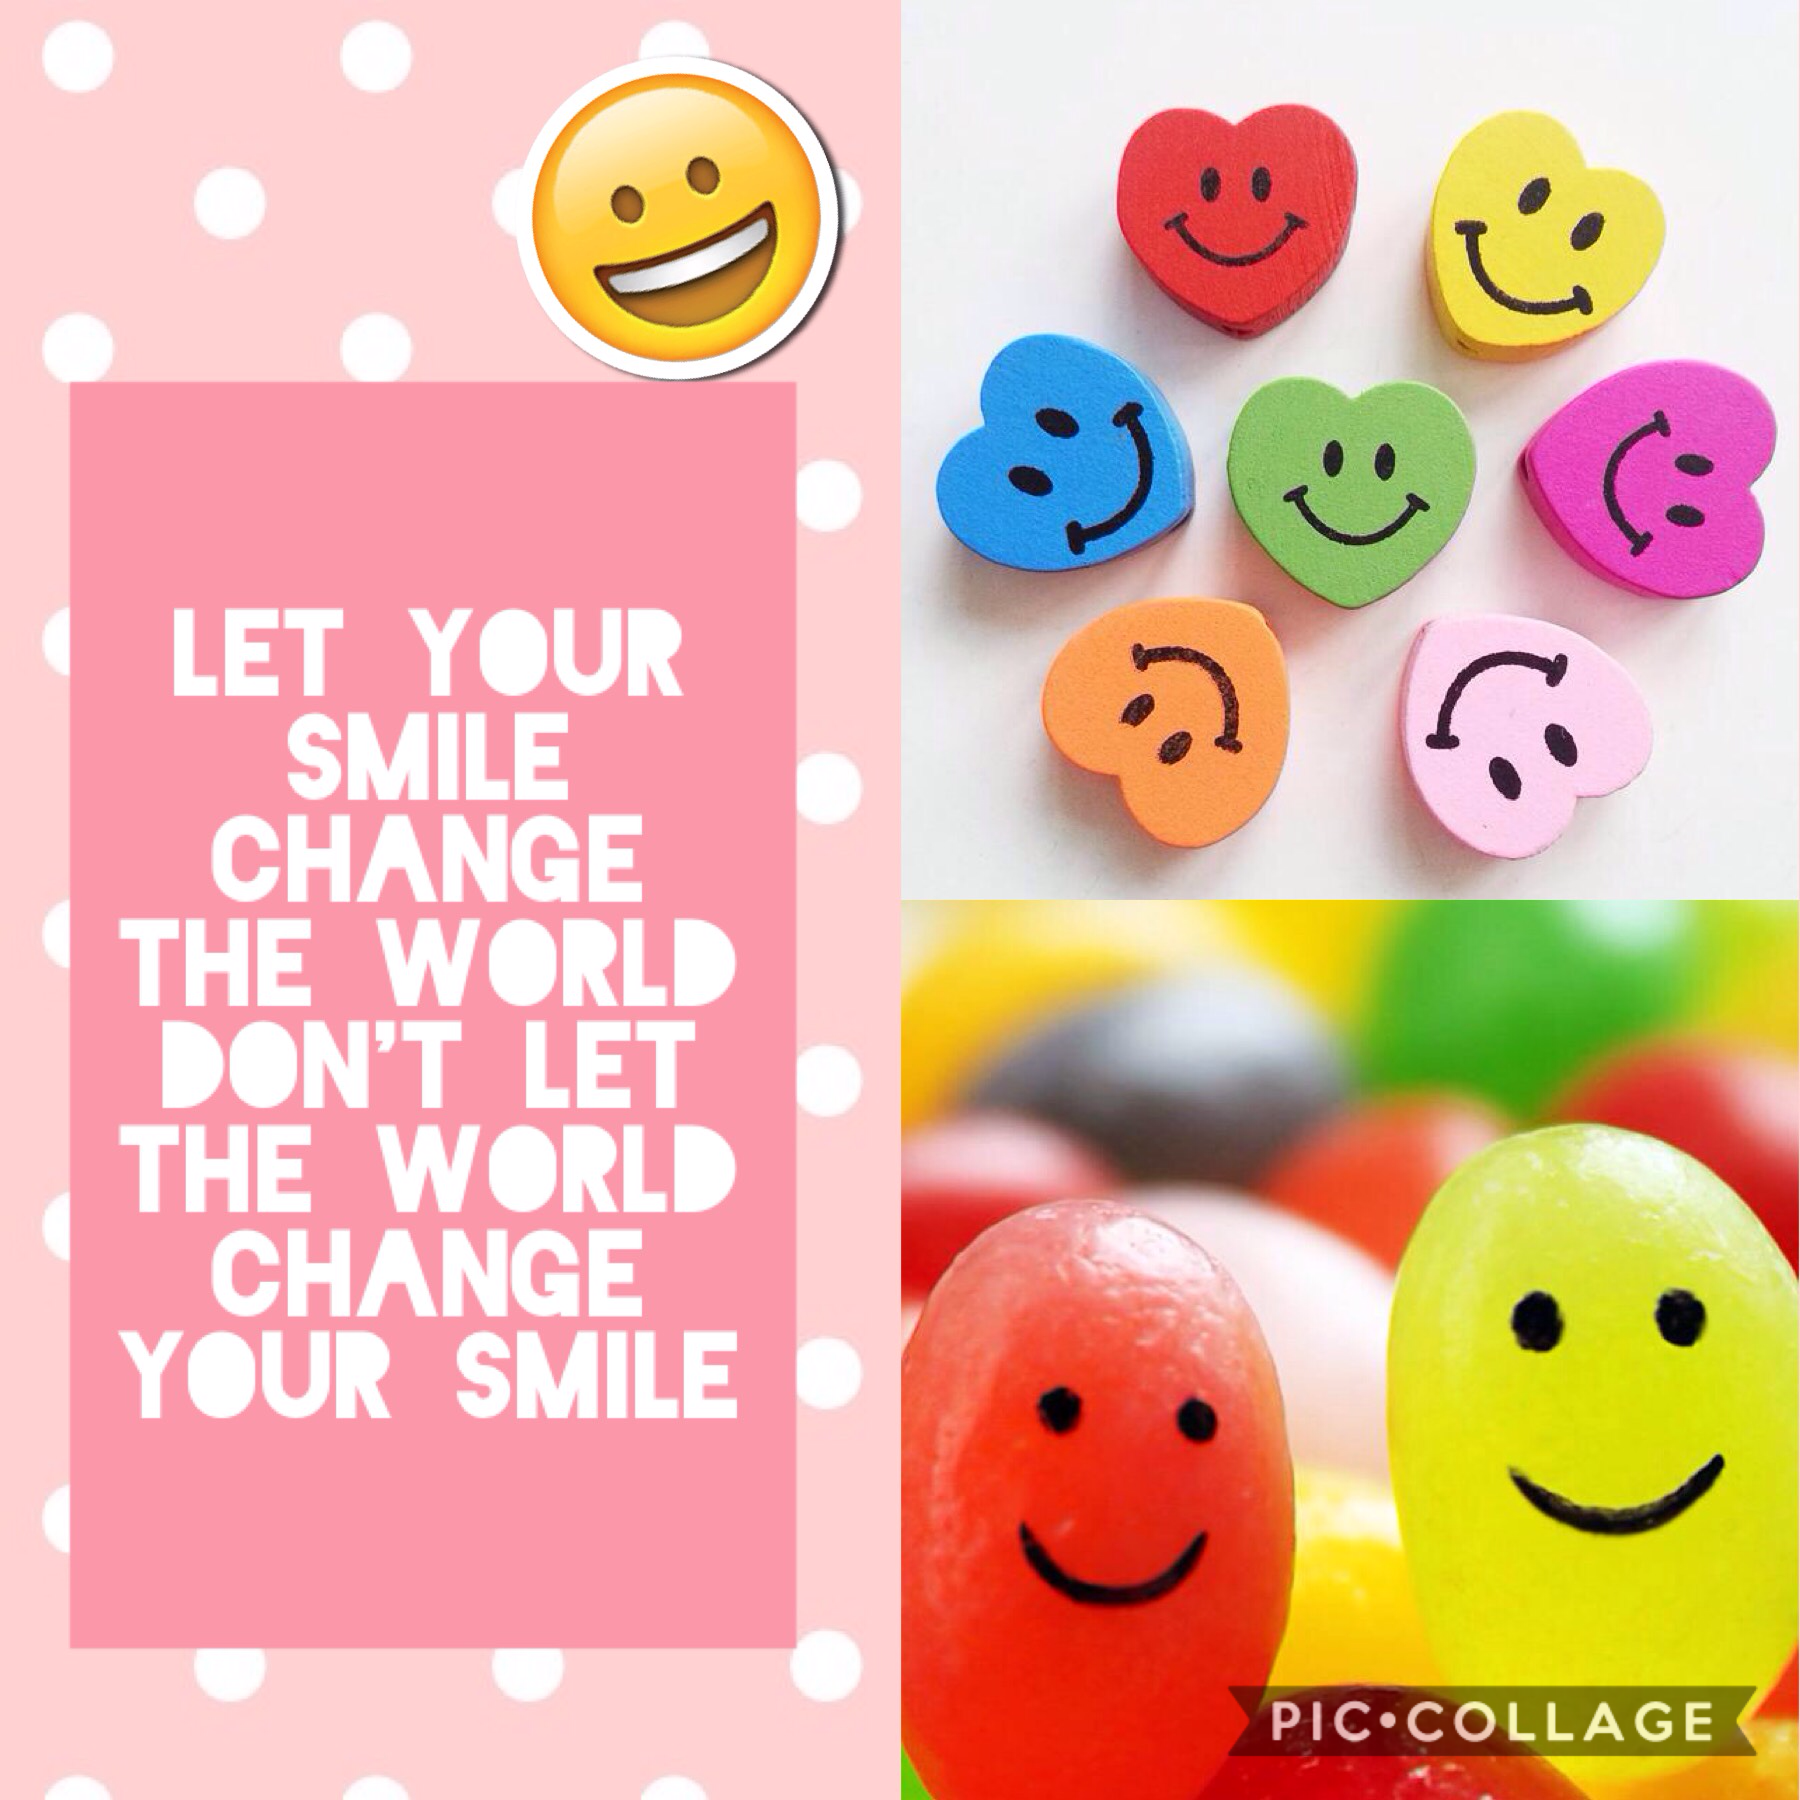 Let your smile change the world don't let the world change your smile (tap)

Go follow Audreyhepburn24
Q: fav. Movie
A: the greatest showman
Comment answers
